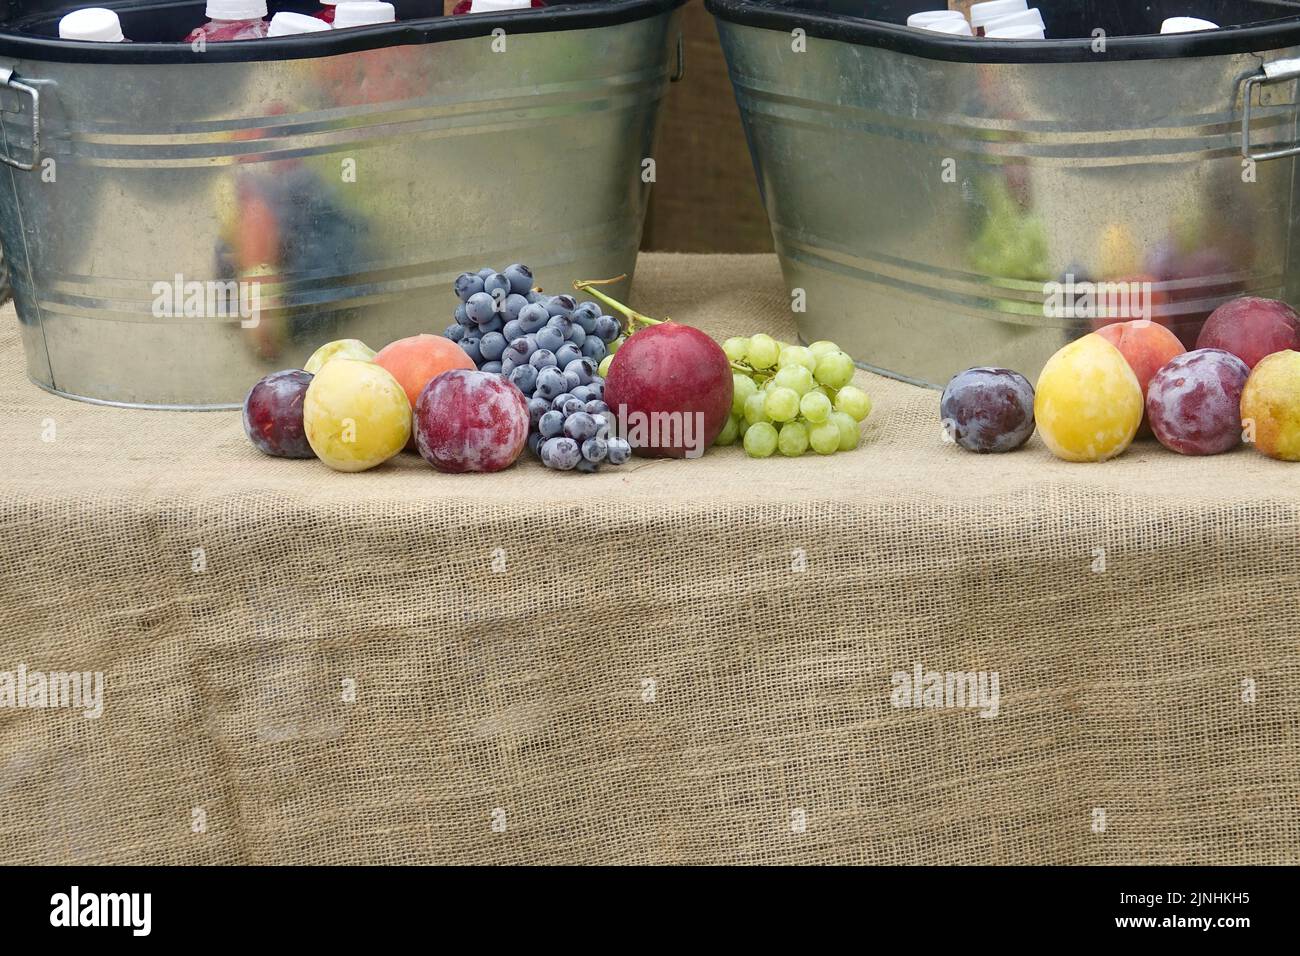 assortment of fresh fruit on display at the farmers market food stall Stock Photo